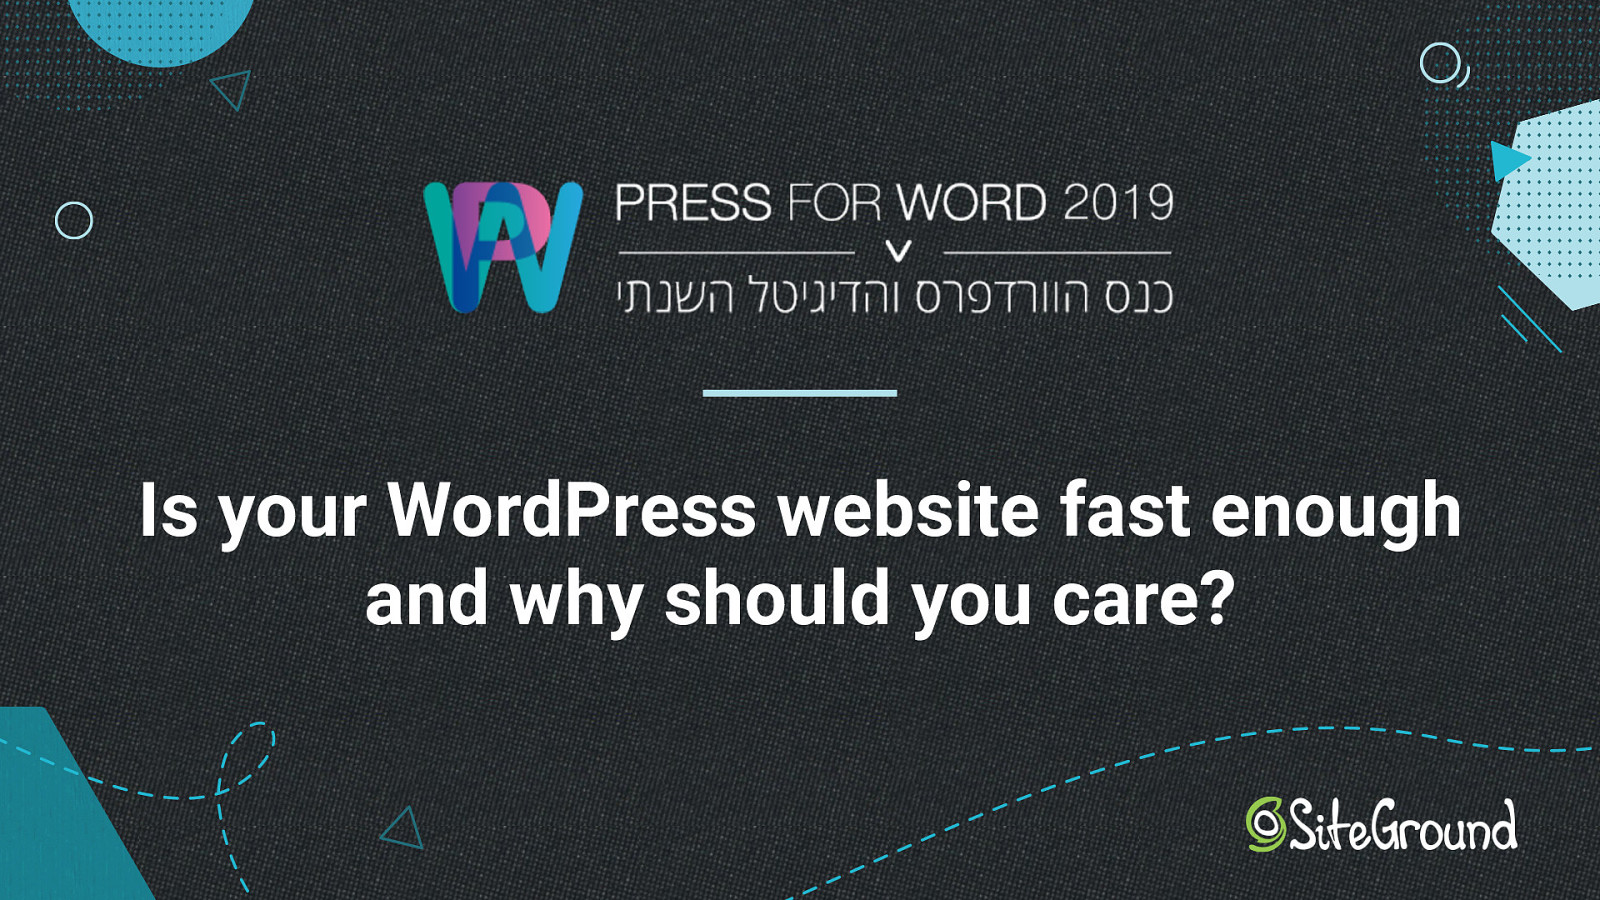 Is your WordPress website fast and why should you care?